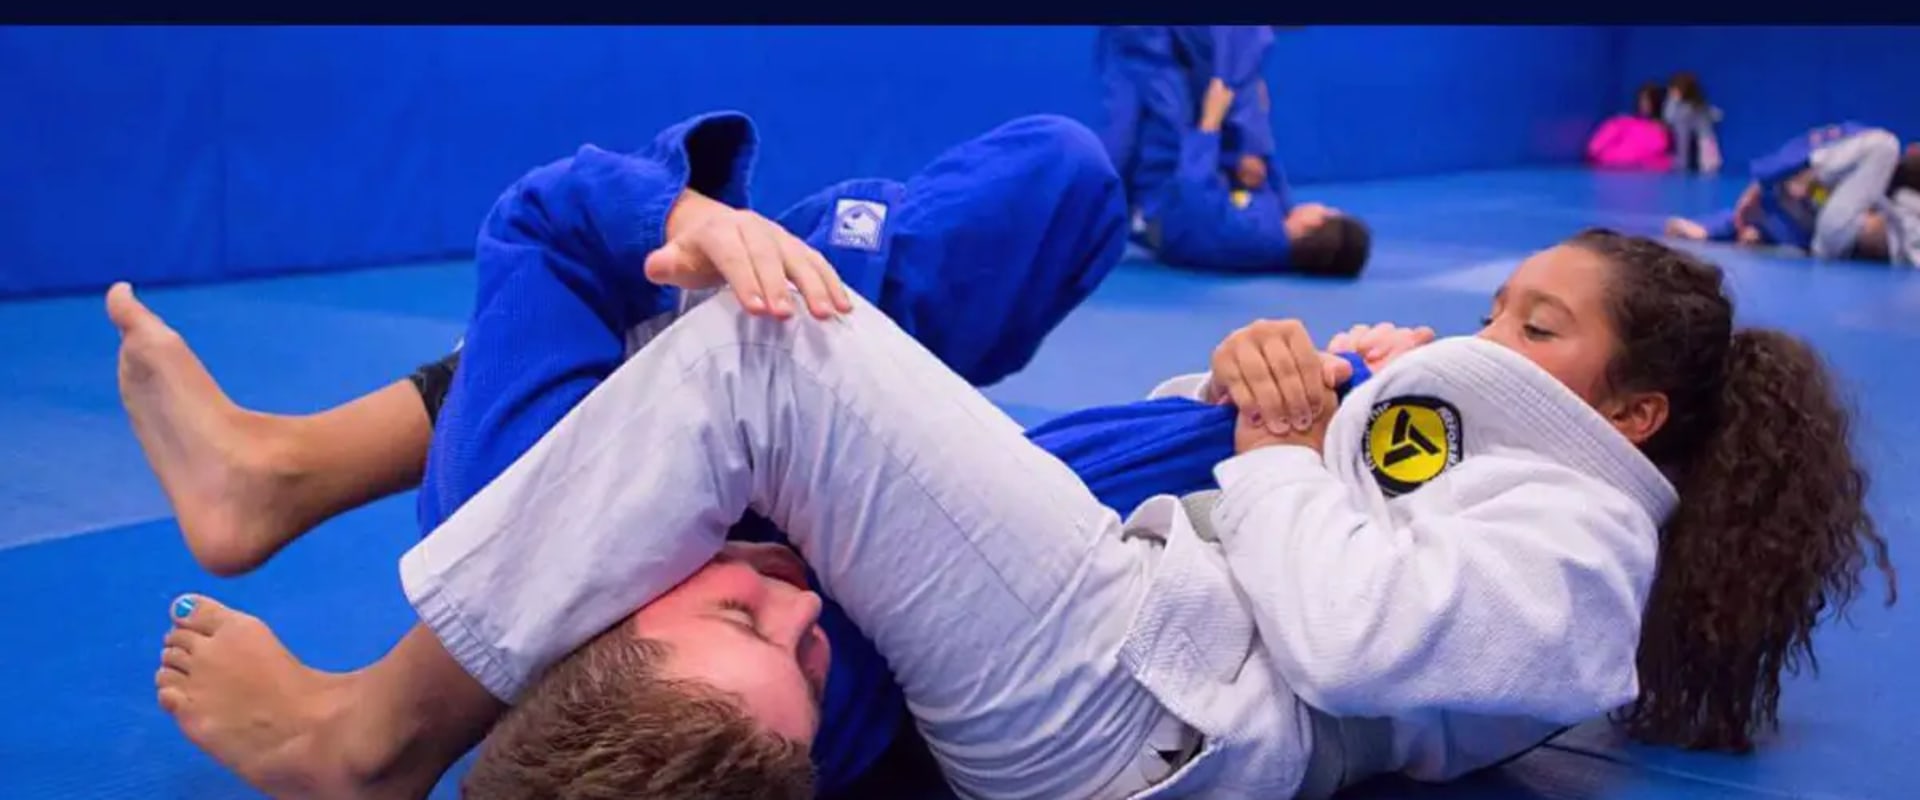 Everything You Need to Know About Jujitsu